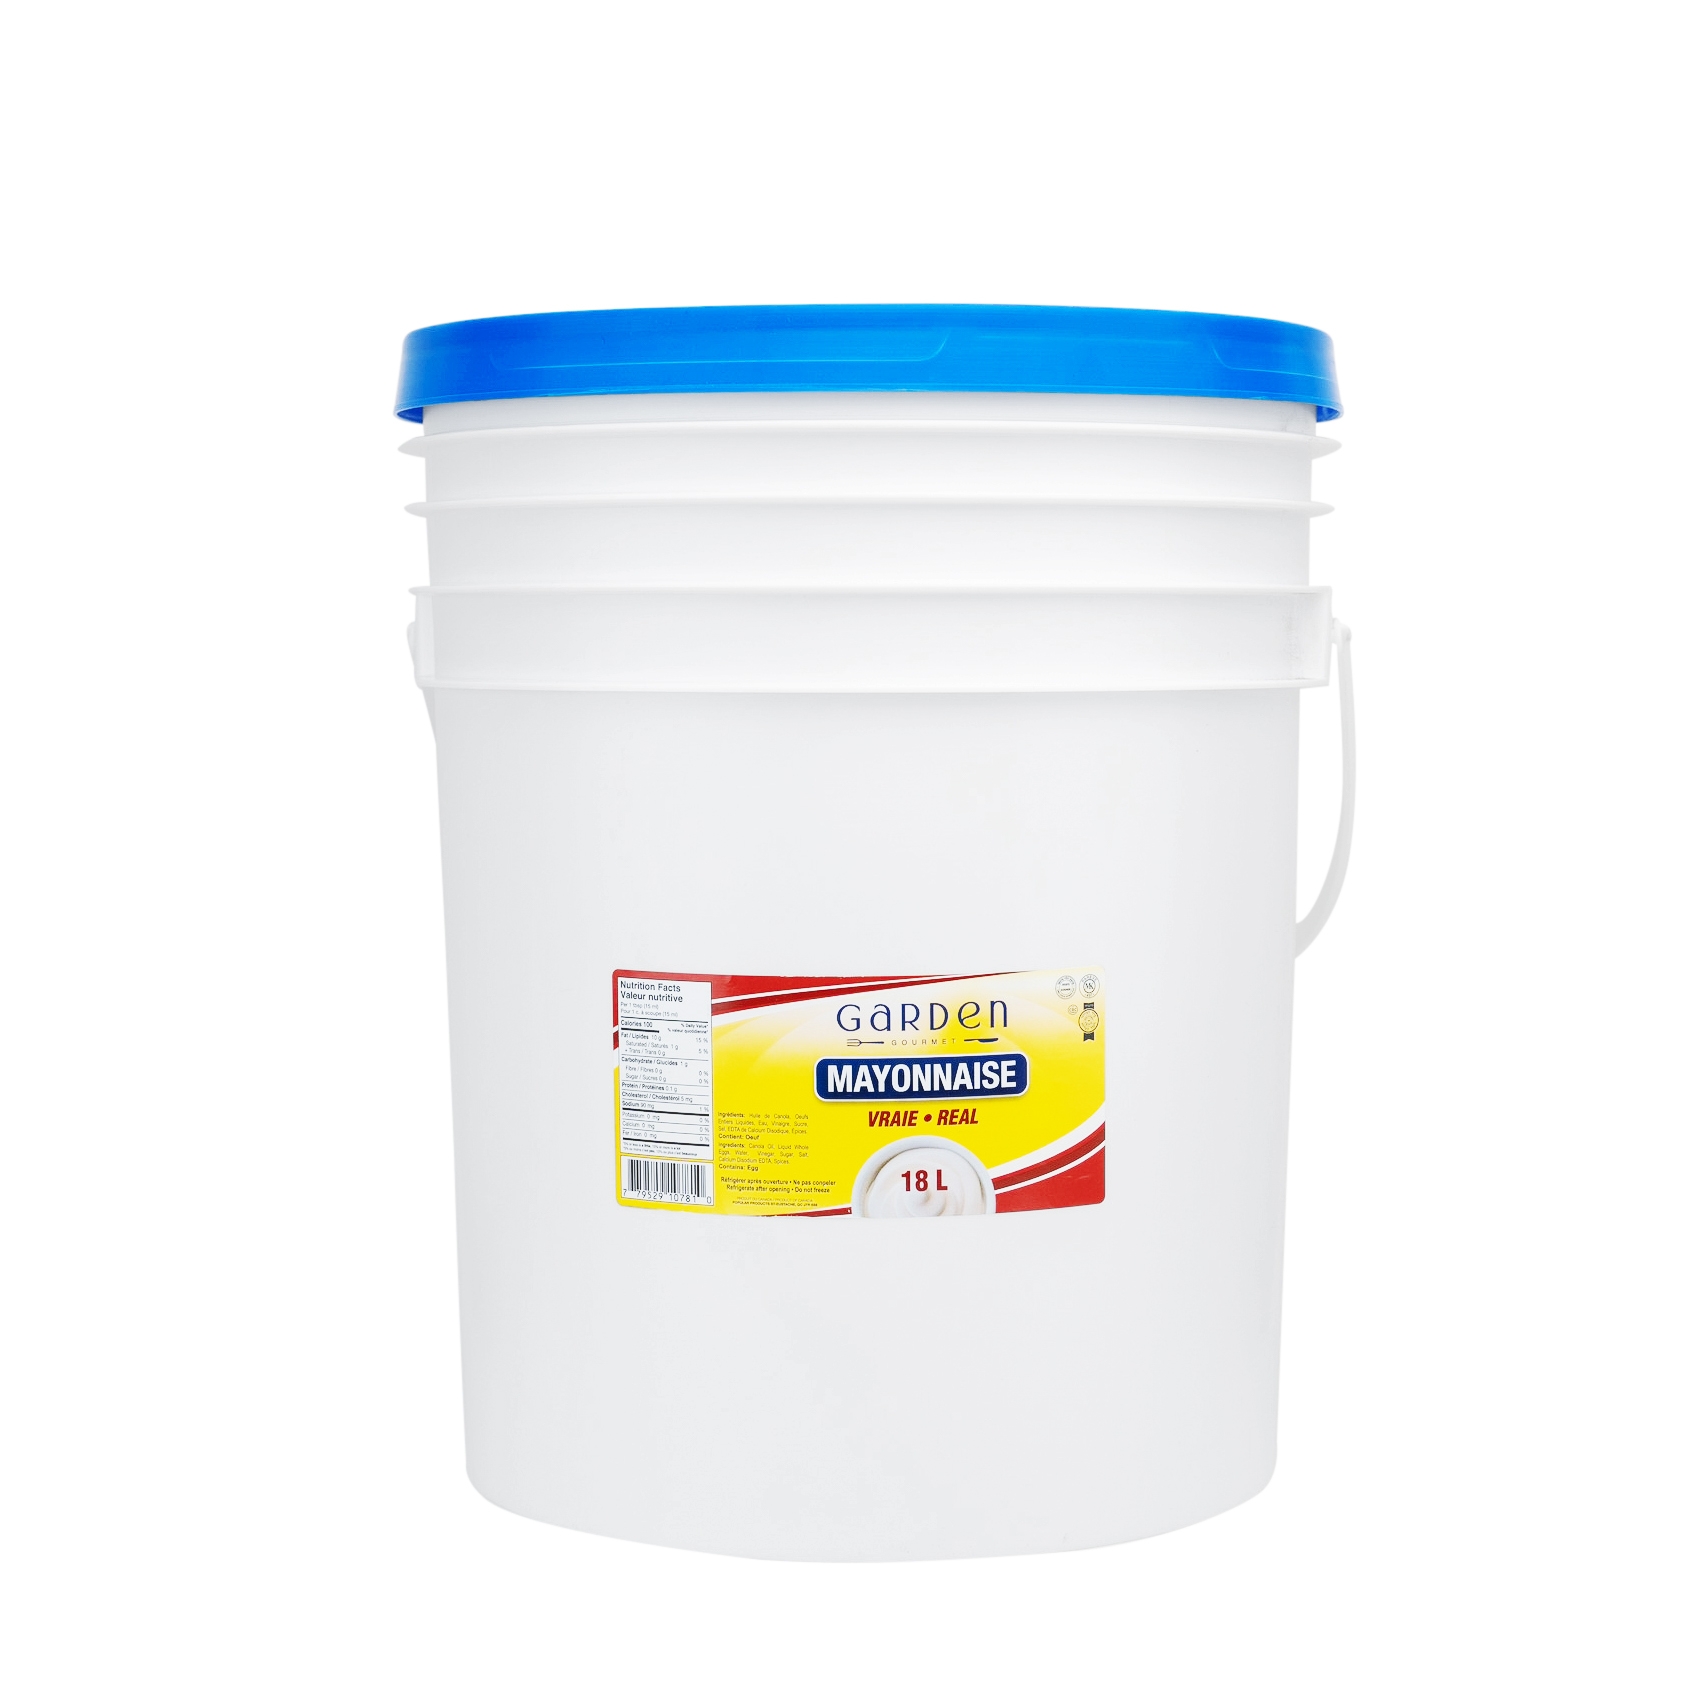 Garden Mayonnaise Vraie Real 18L